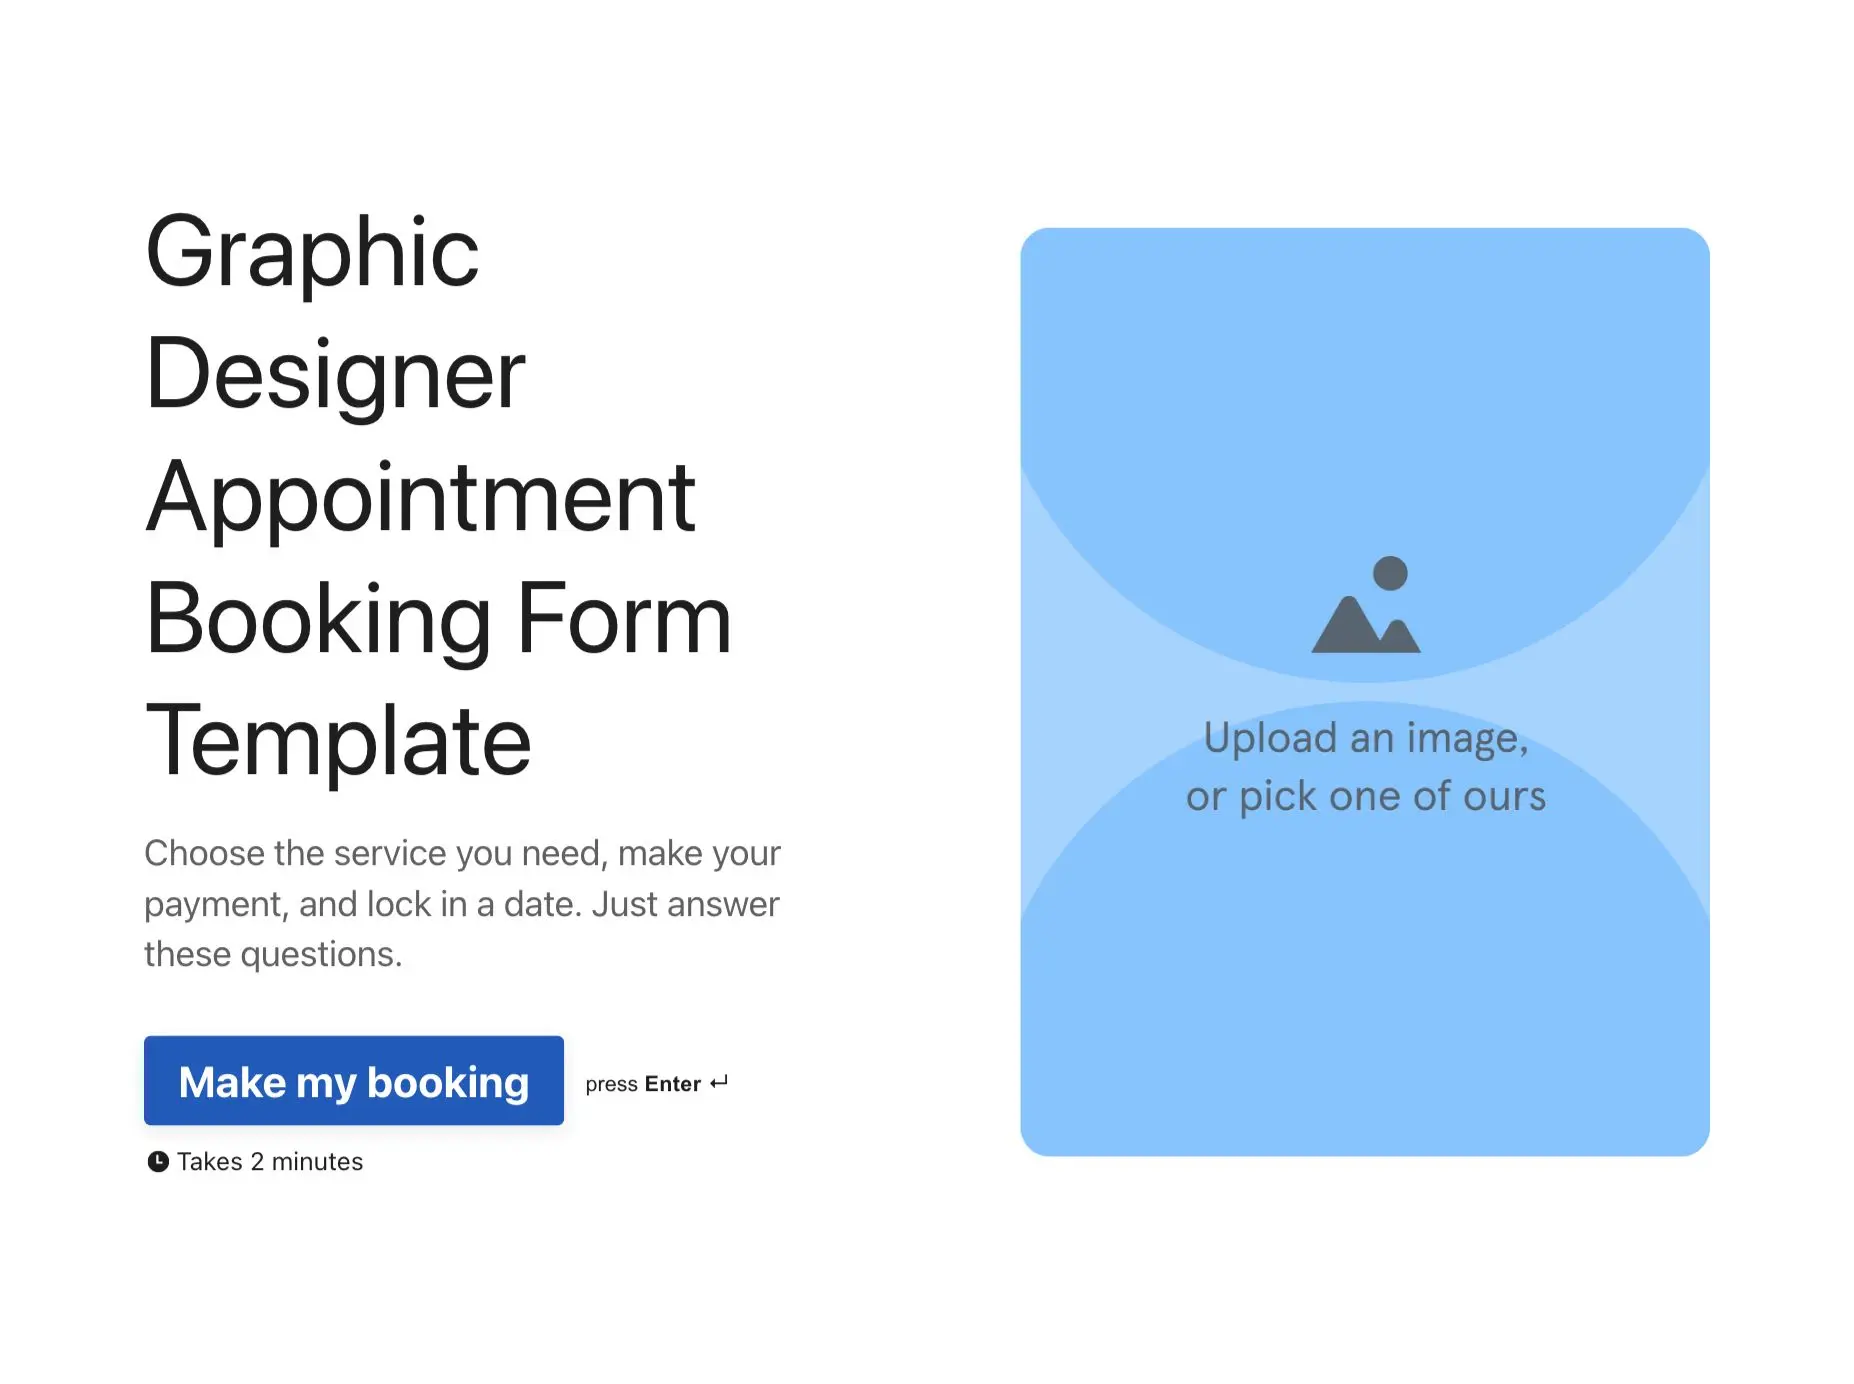 Graphic Designer Appointment Booking Form Template Hero